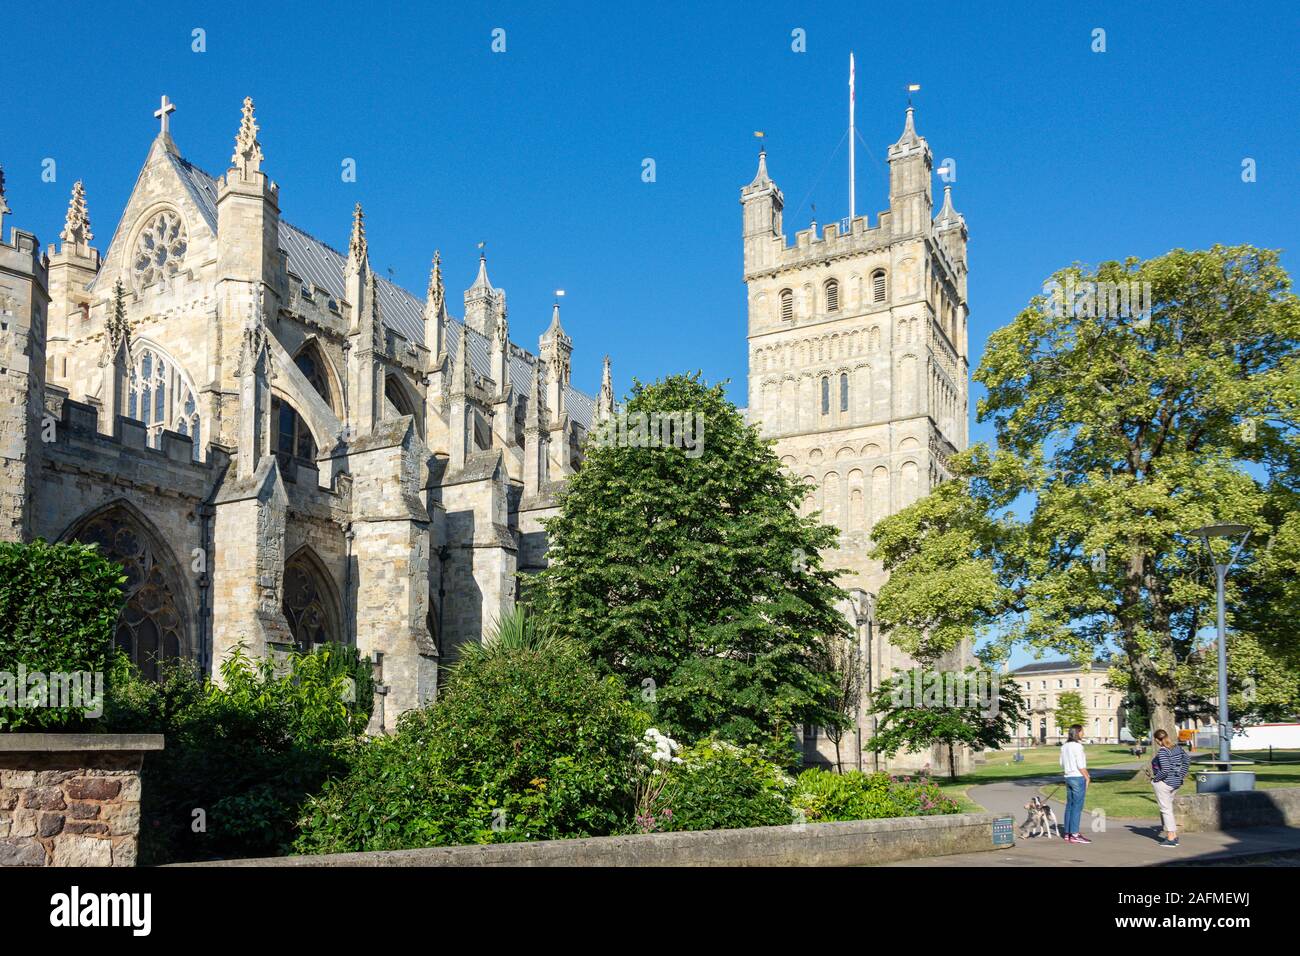 The South Tower, Exeter Cathedral, Exeter, Devon, England, United Kingdom Stock Photo